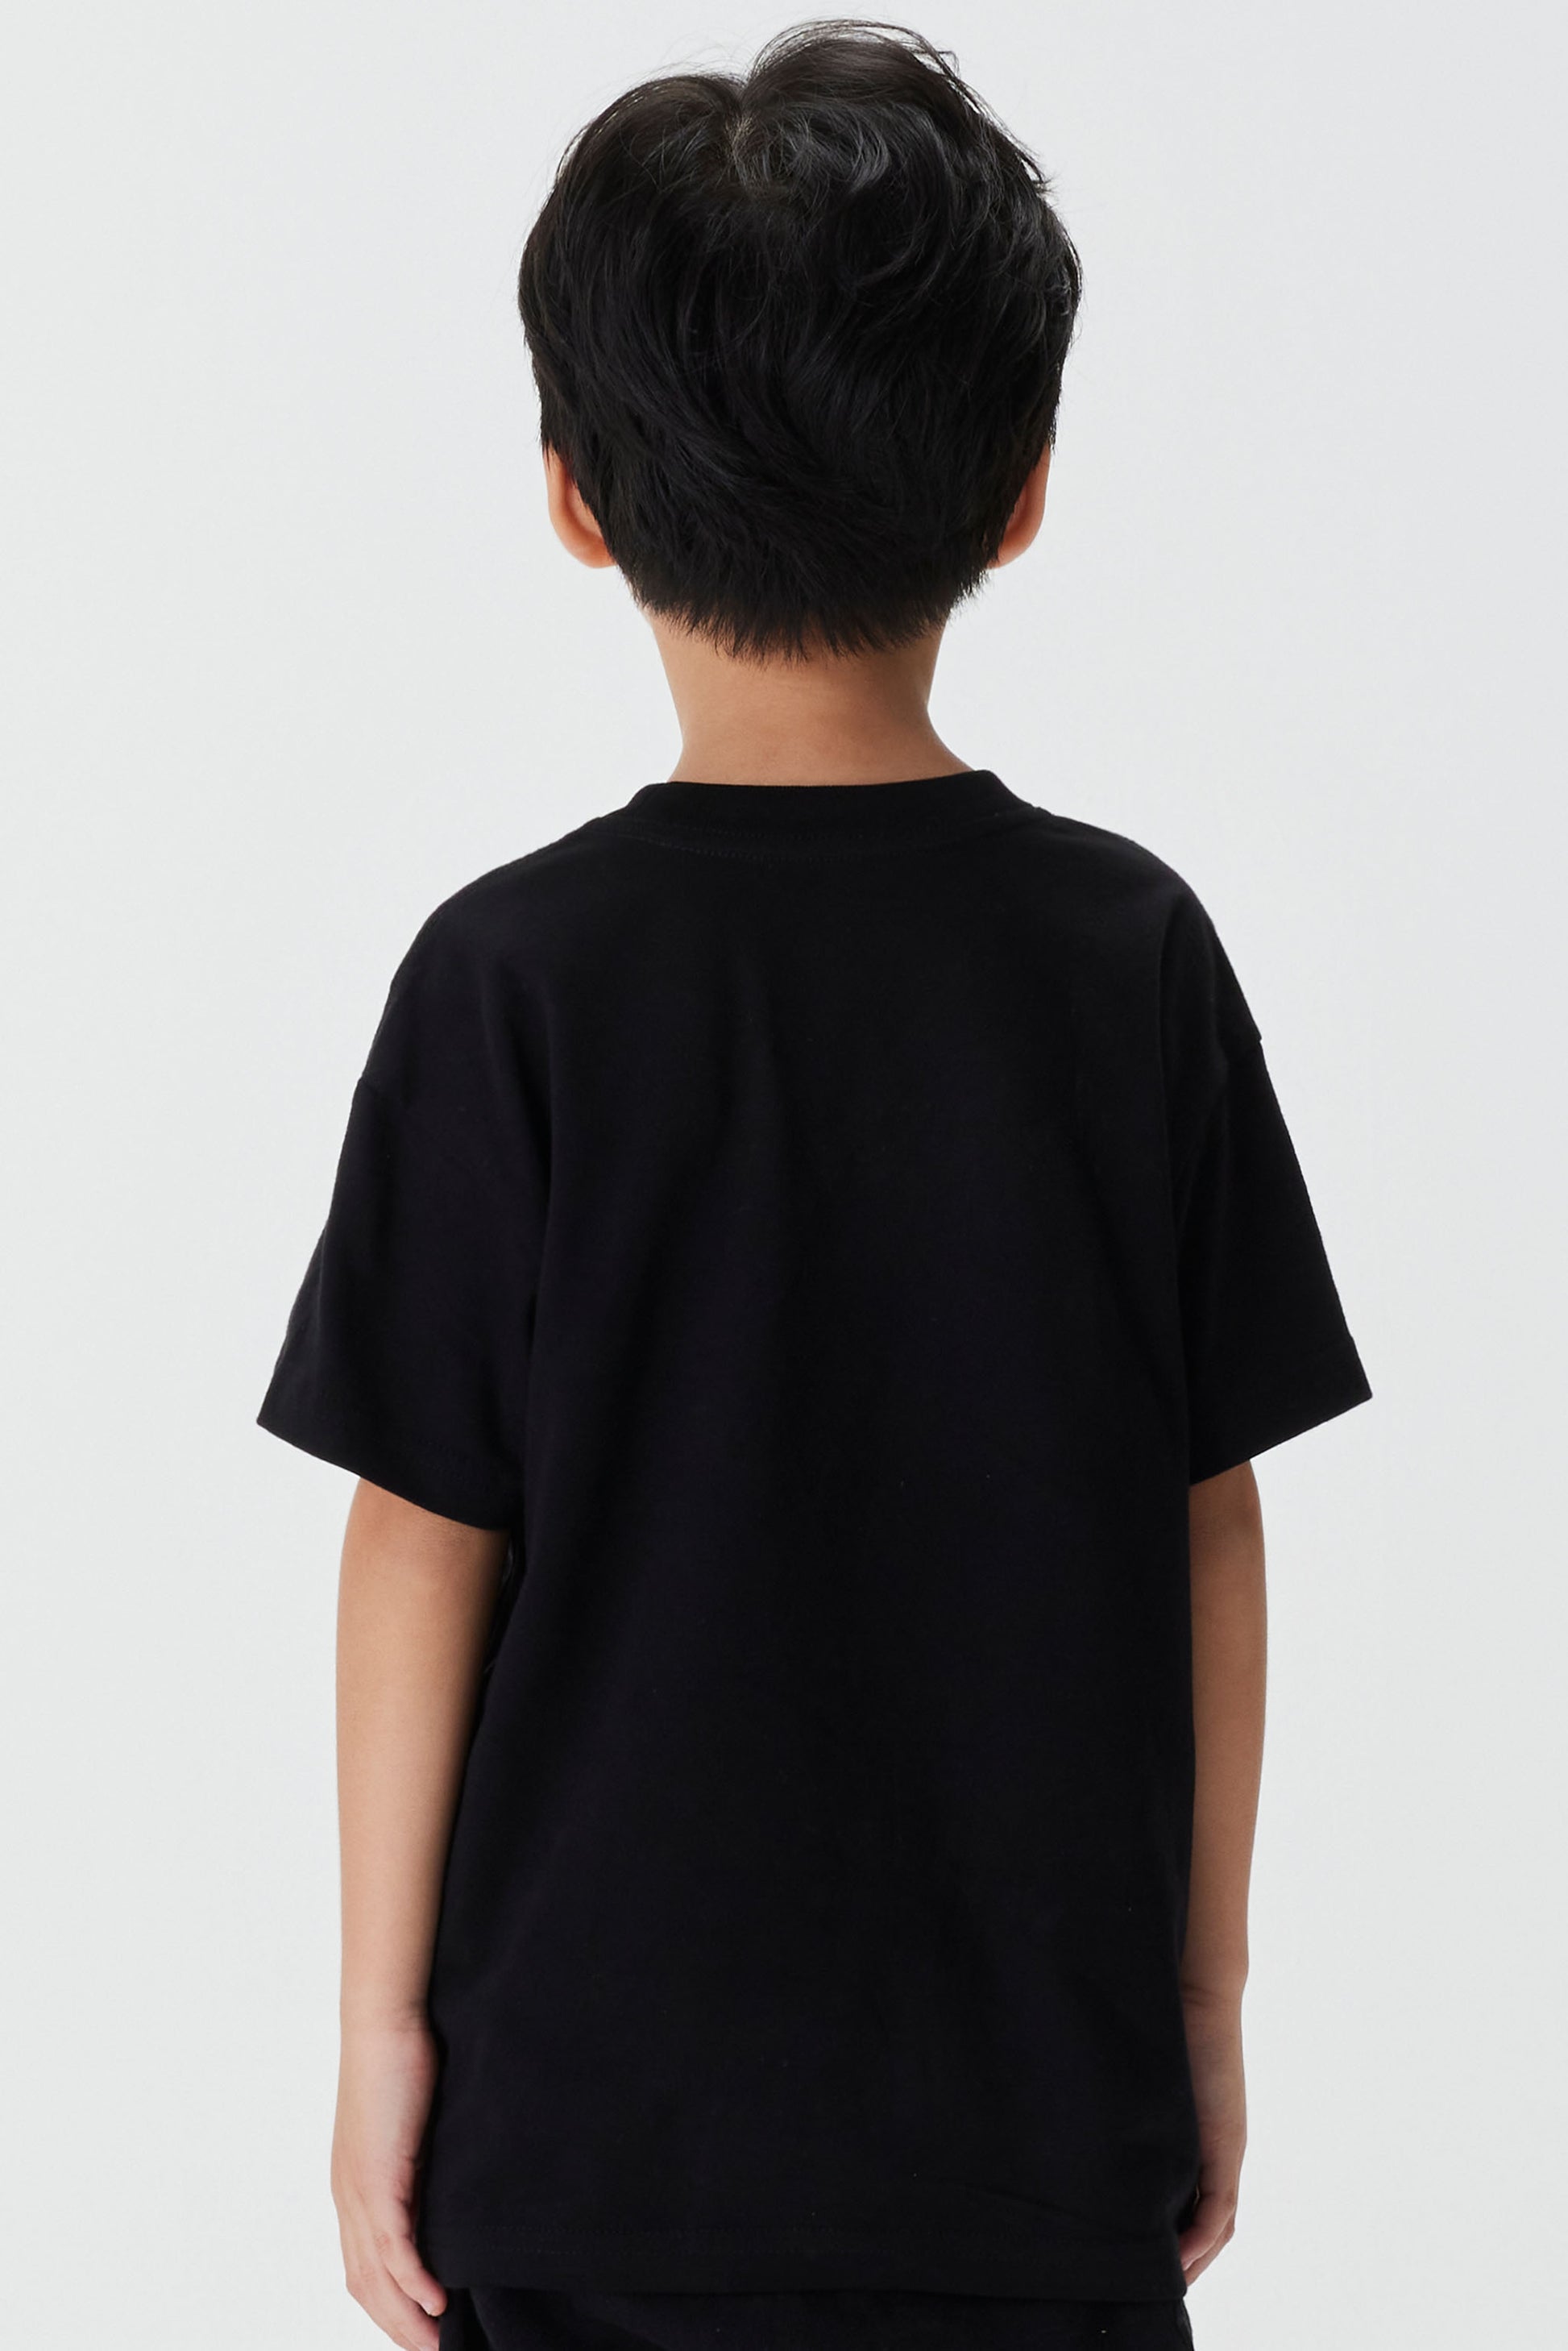 KIDS REFLECTIVE PANTHER S/SLEEVE BLACK - – TEE